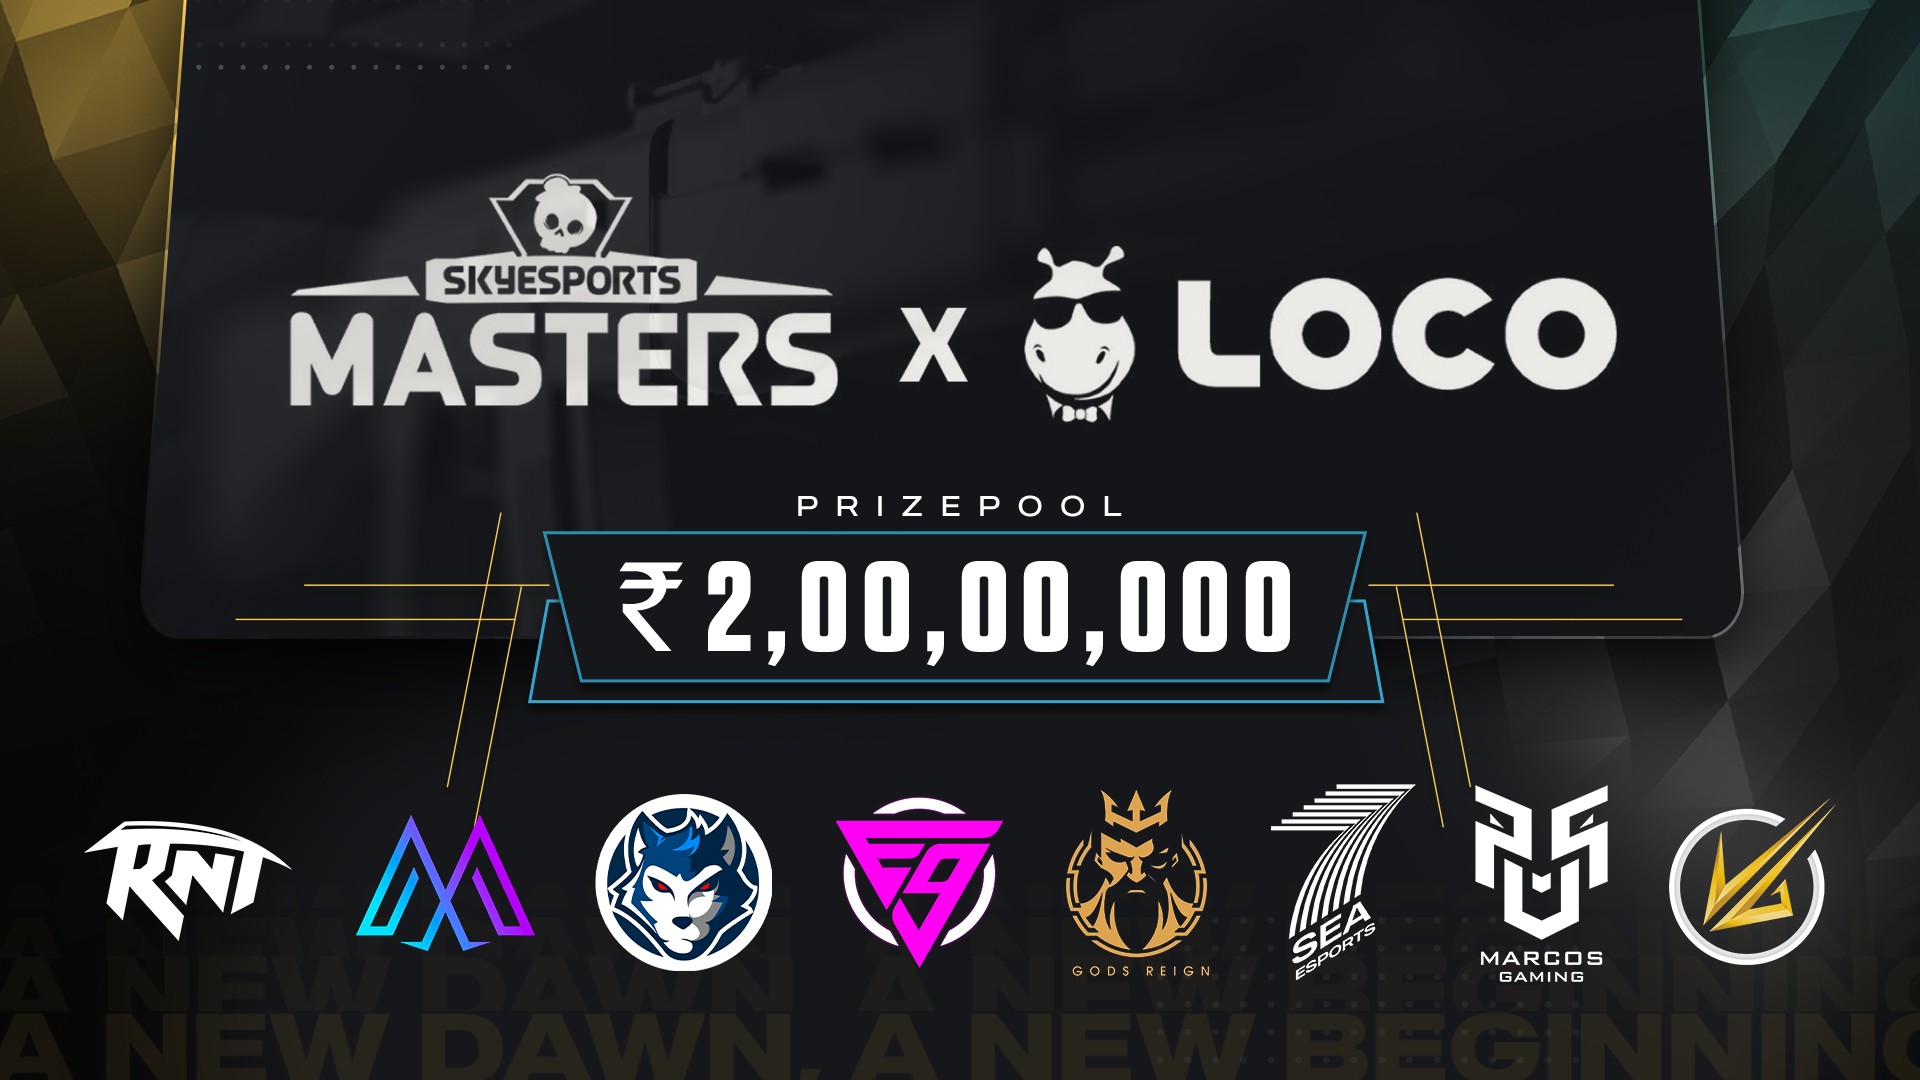 Skyesports secures Loco broadcasting partnership for Skyesports Masters